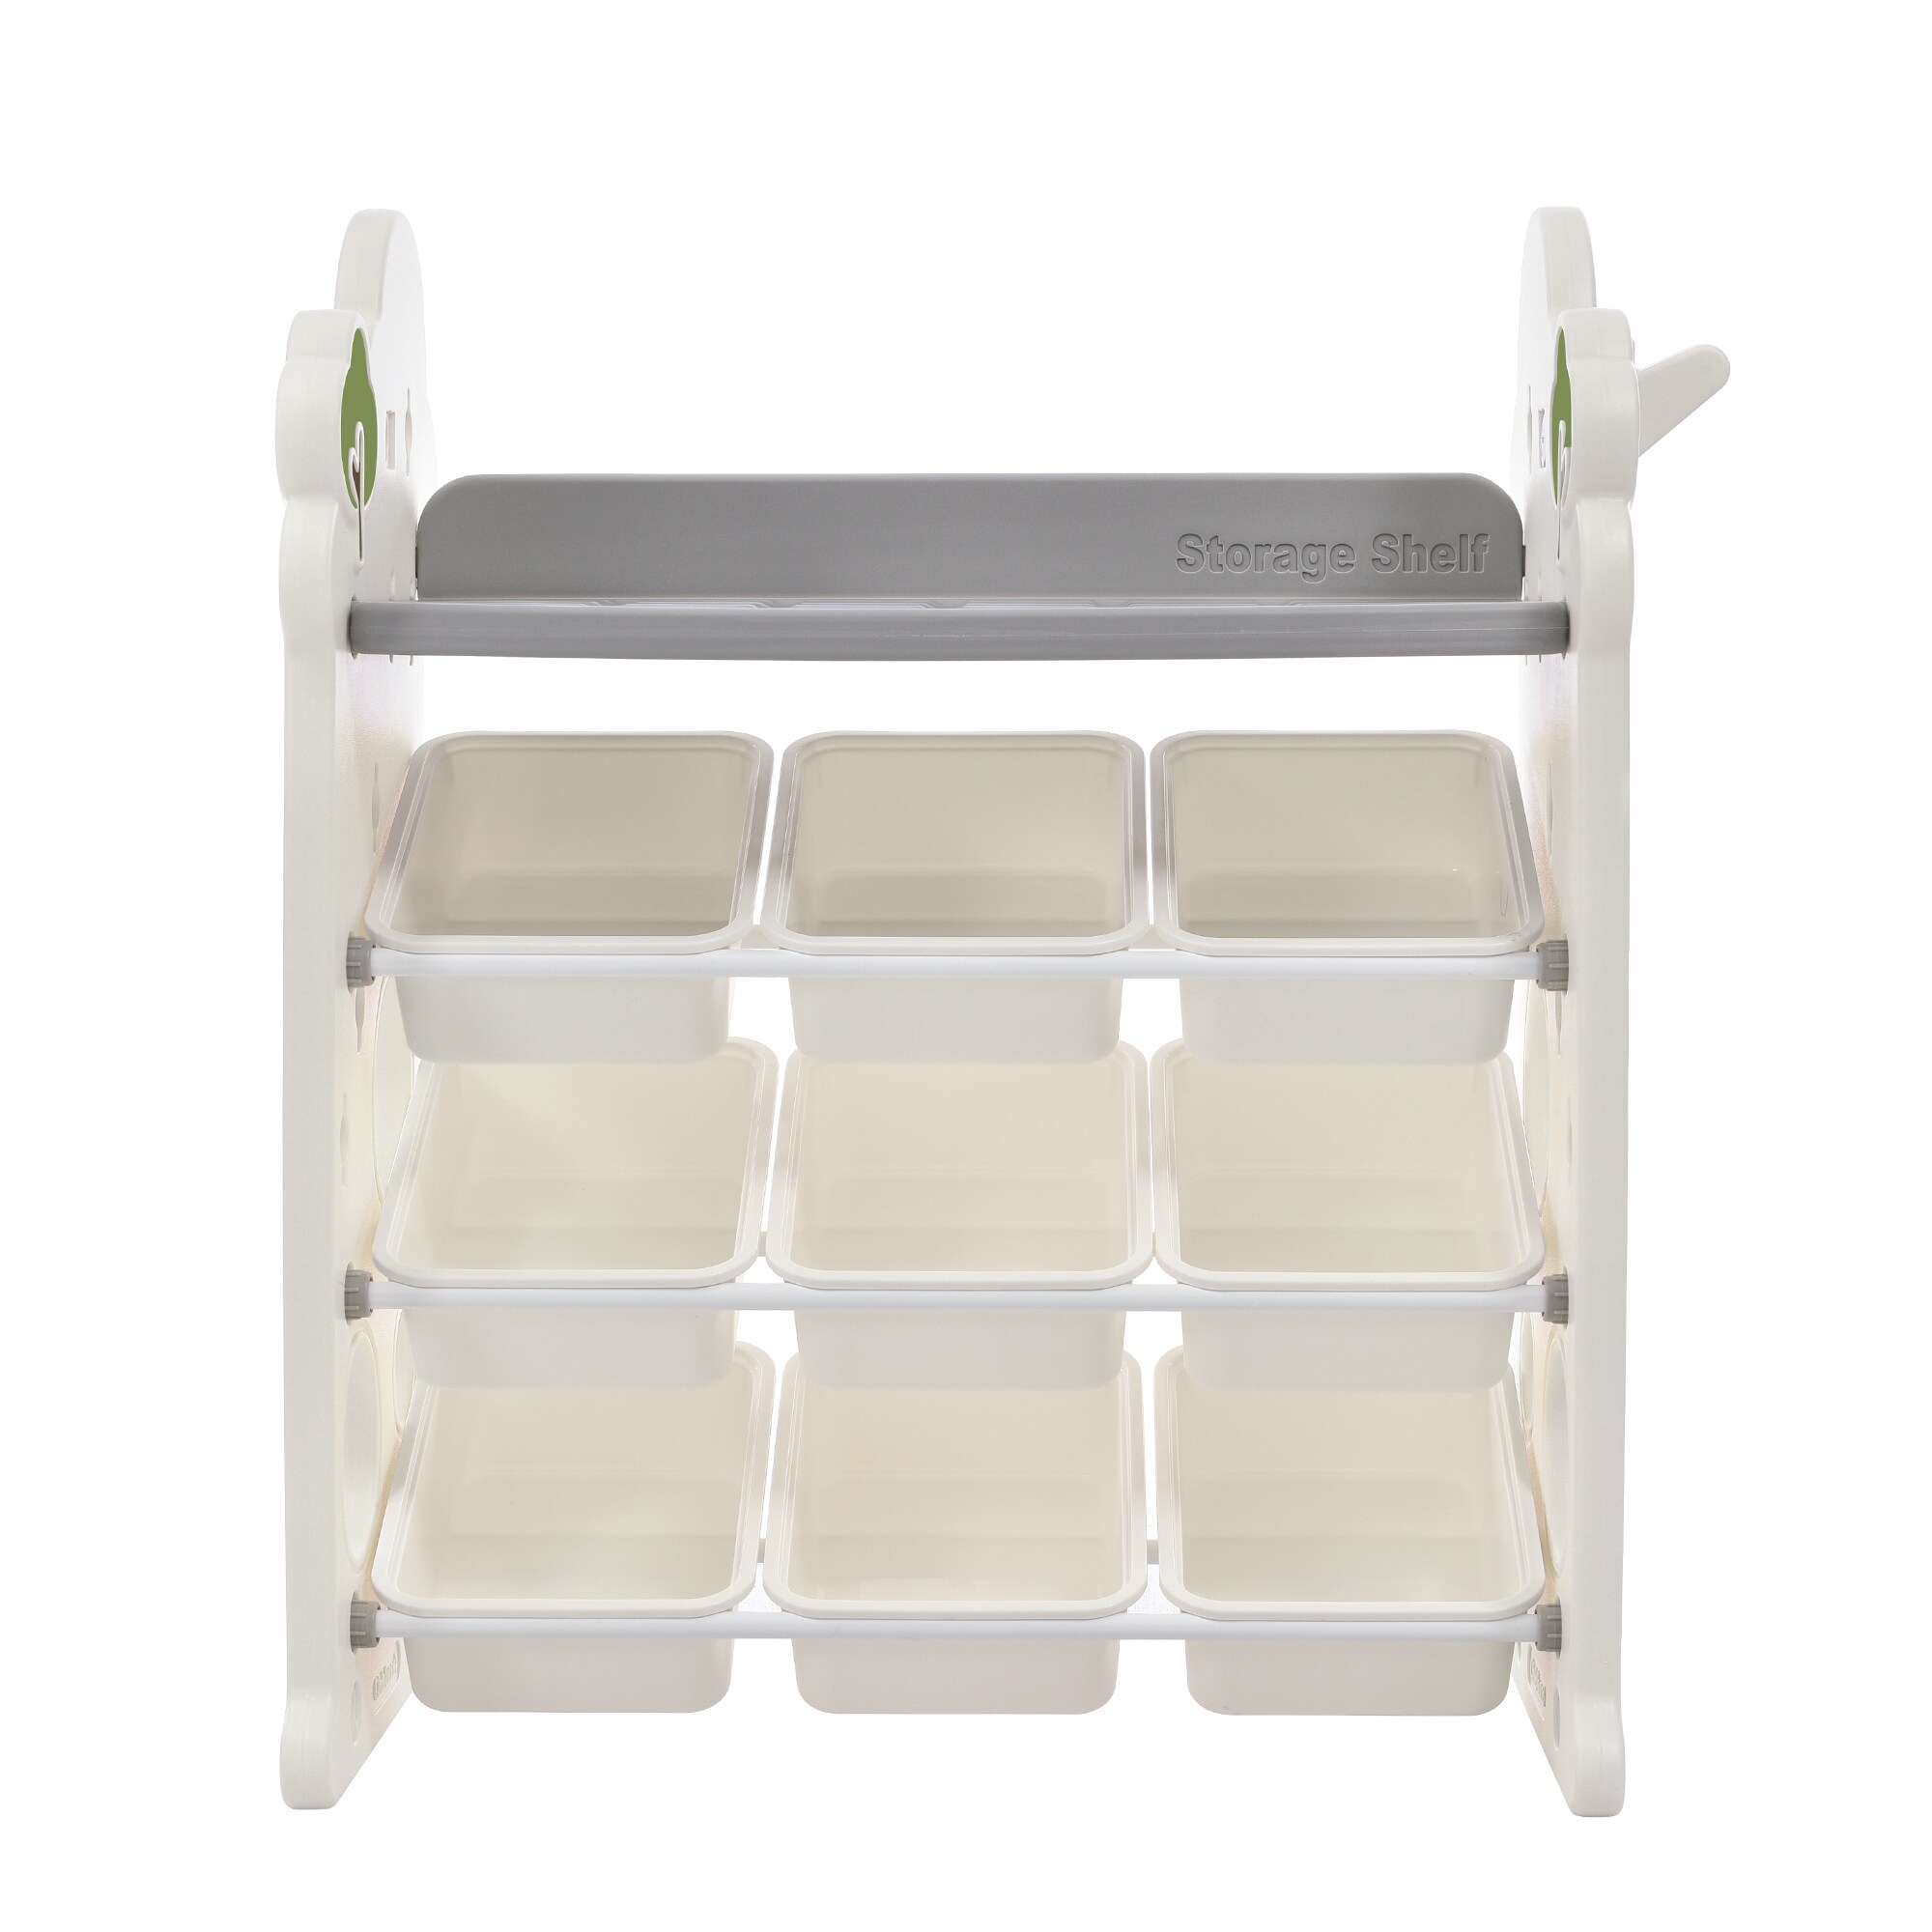 https://ak1.ostkcdn.com/images/products/is/images/direct/c3d5146338c6ebc66c2da6fabe1ce1d4082a8fe4/Multi-functional-Kids-Bookshelf-Toy-Storage-Organizer-with-12-Bins-and-4-Bookshelves.jpg